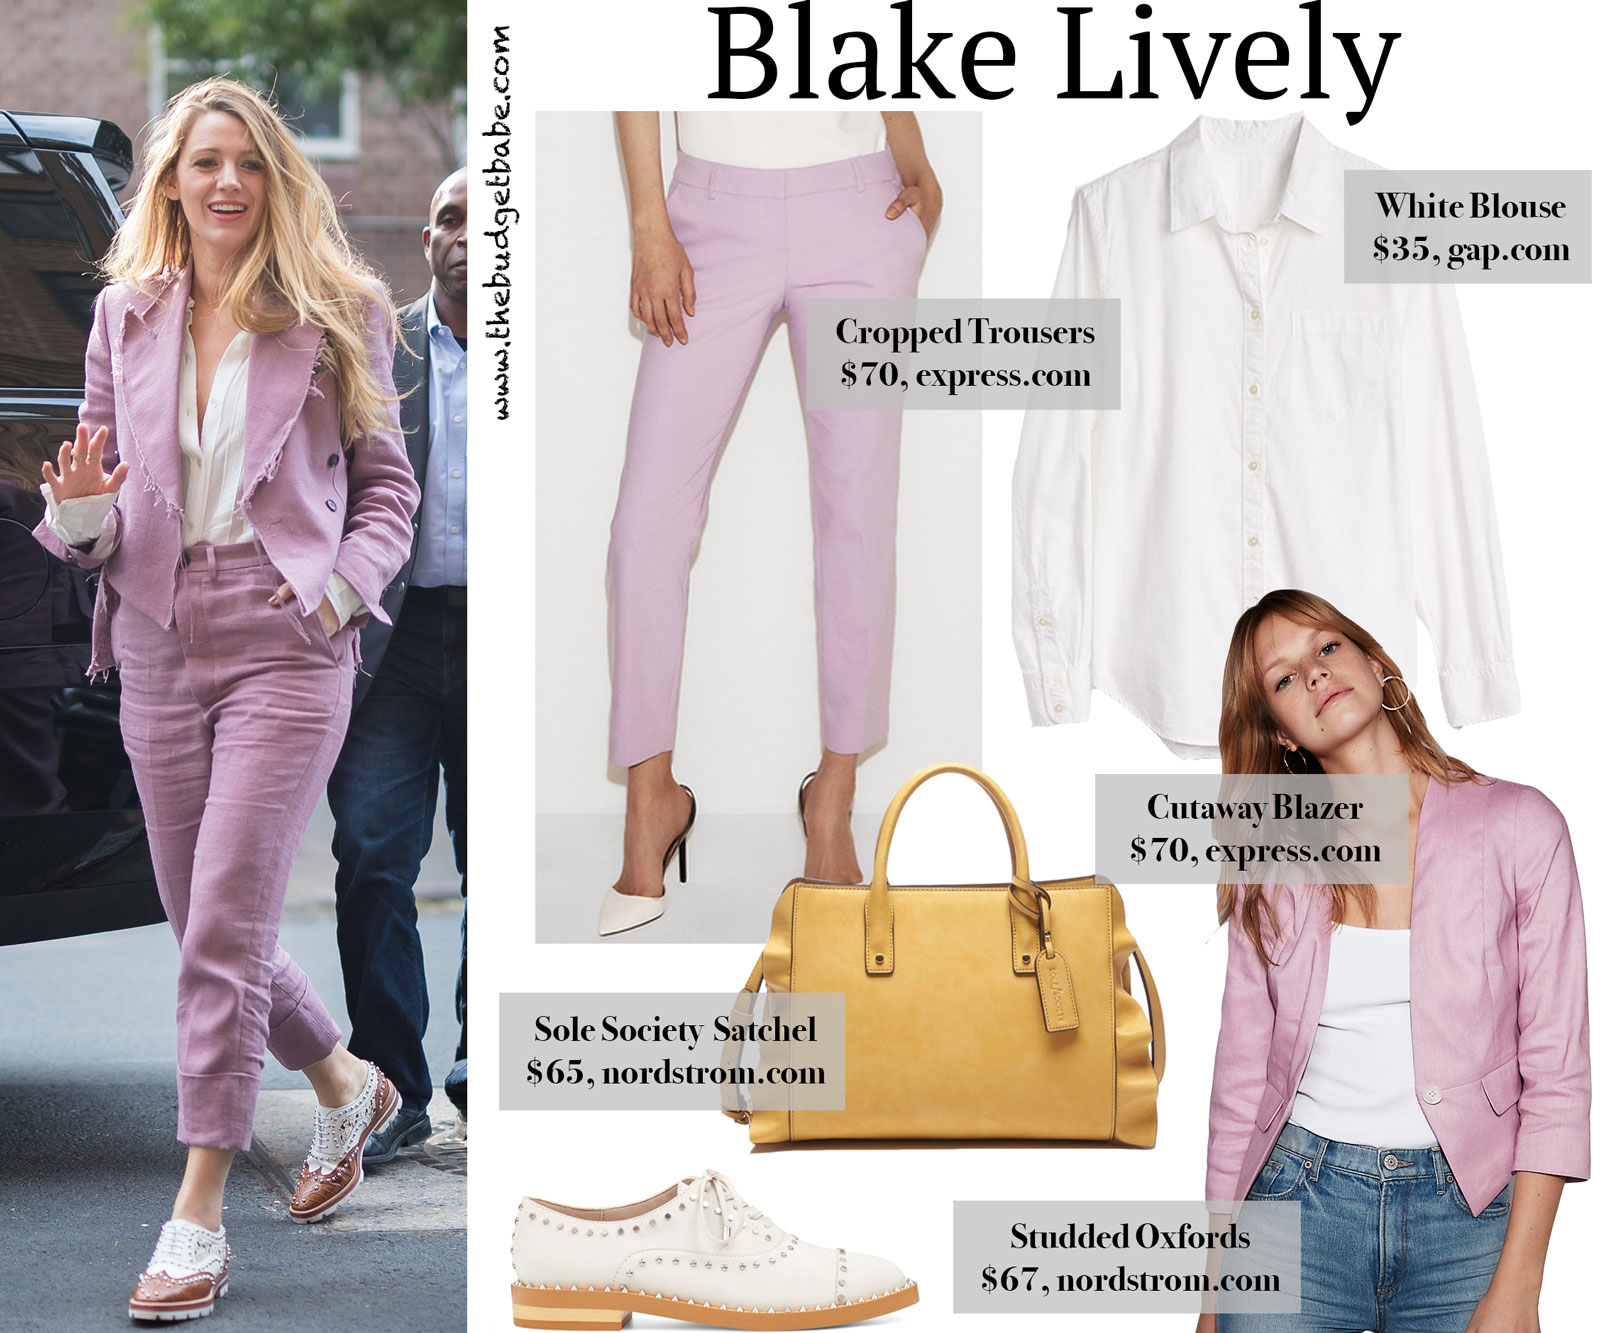 Blake Lively Mauve Jacket and Trousers Look for Less